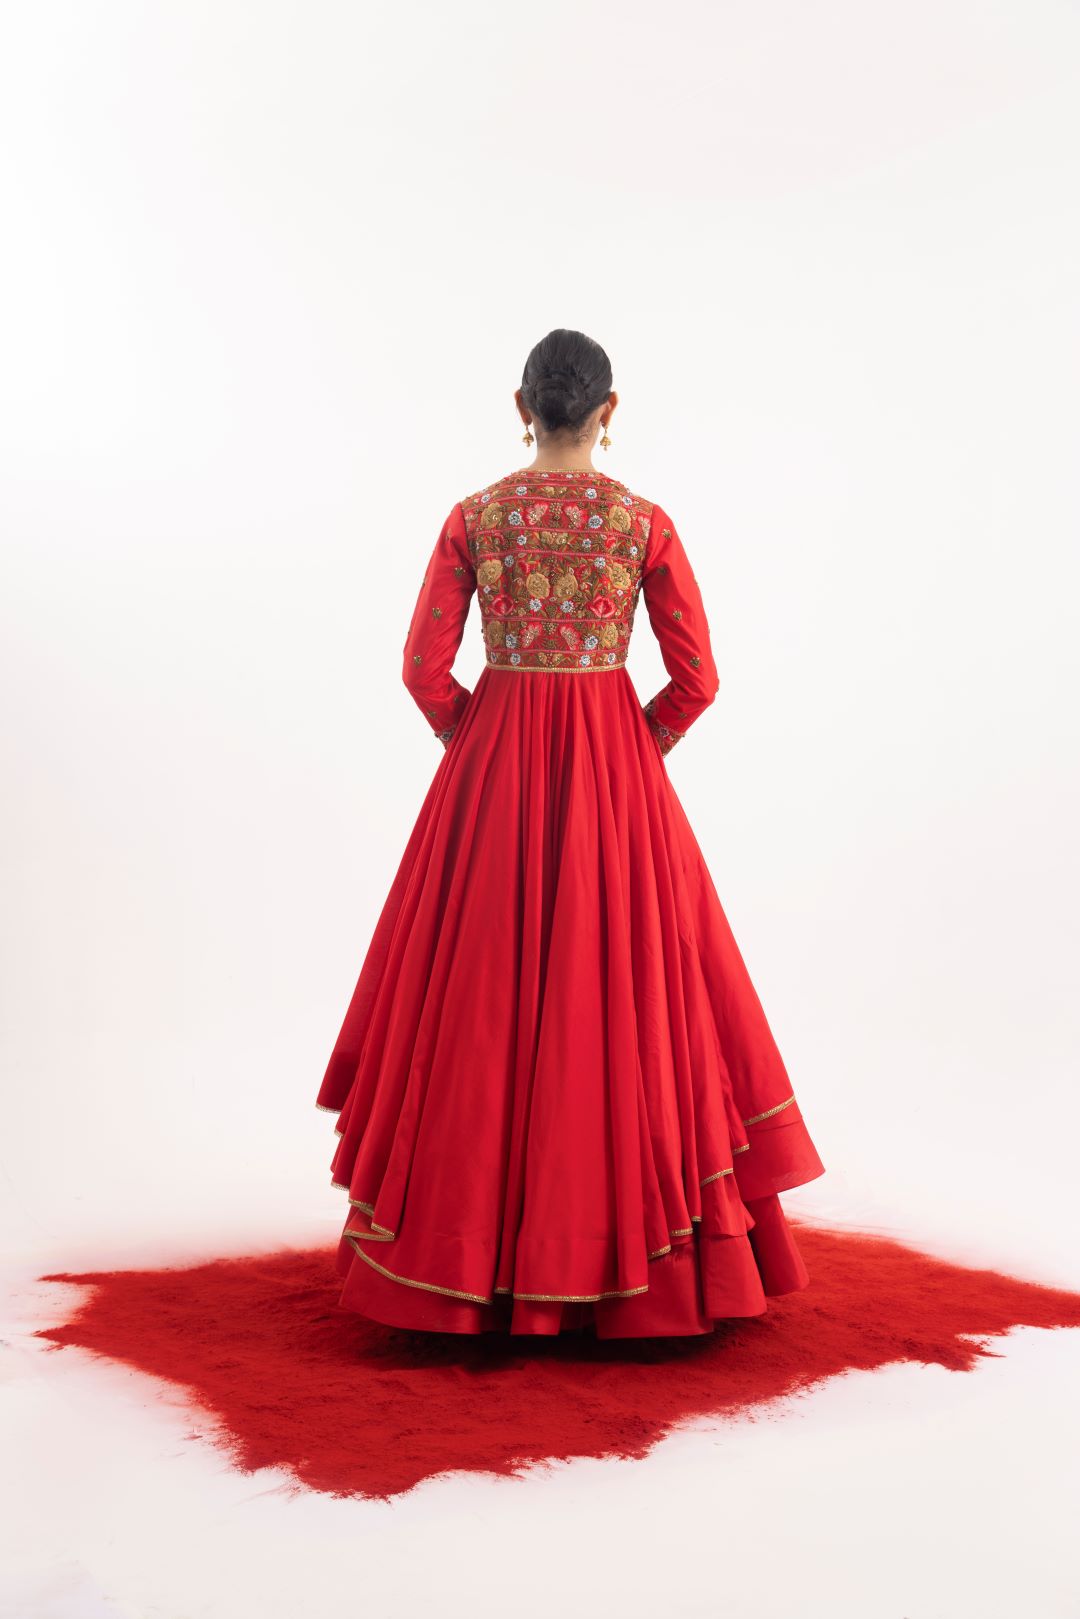 Radiant one-piece ensemble: a red embroidered anarkali